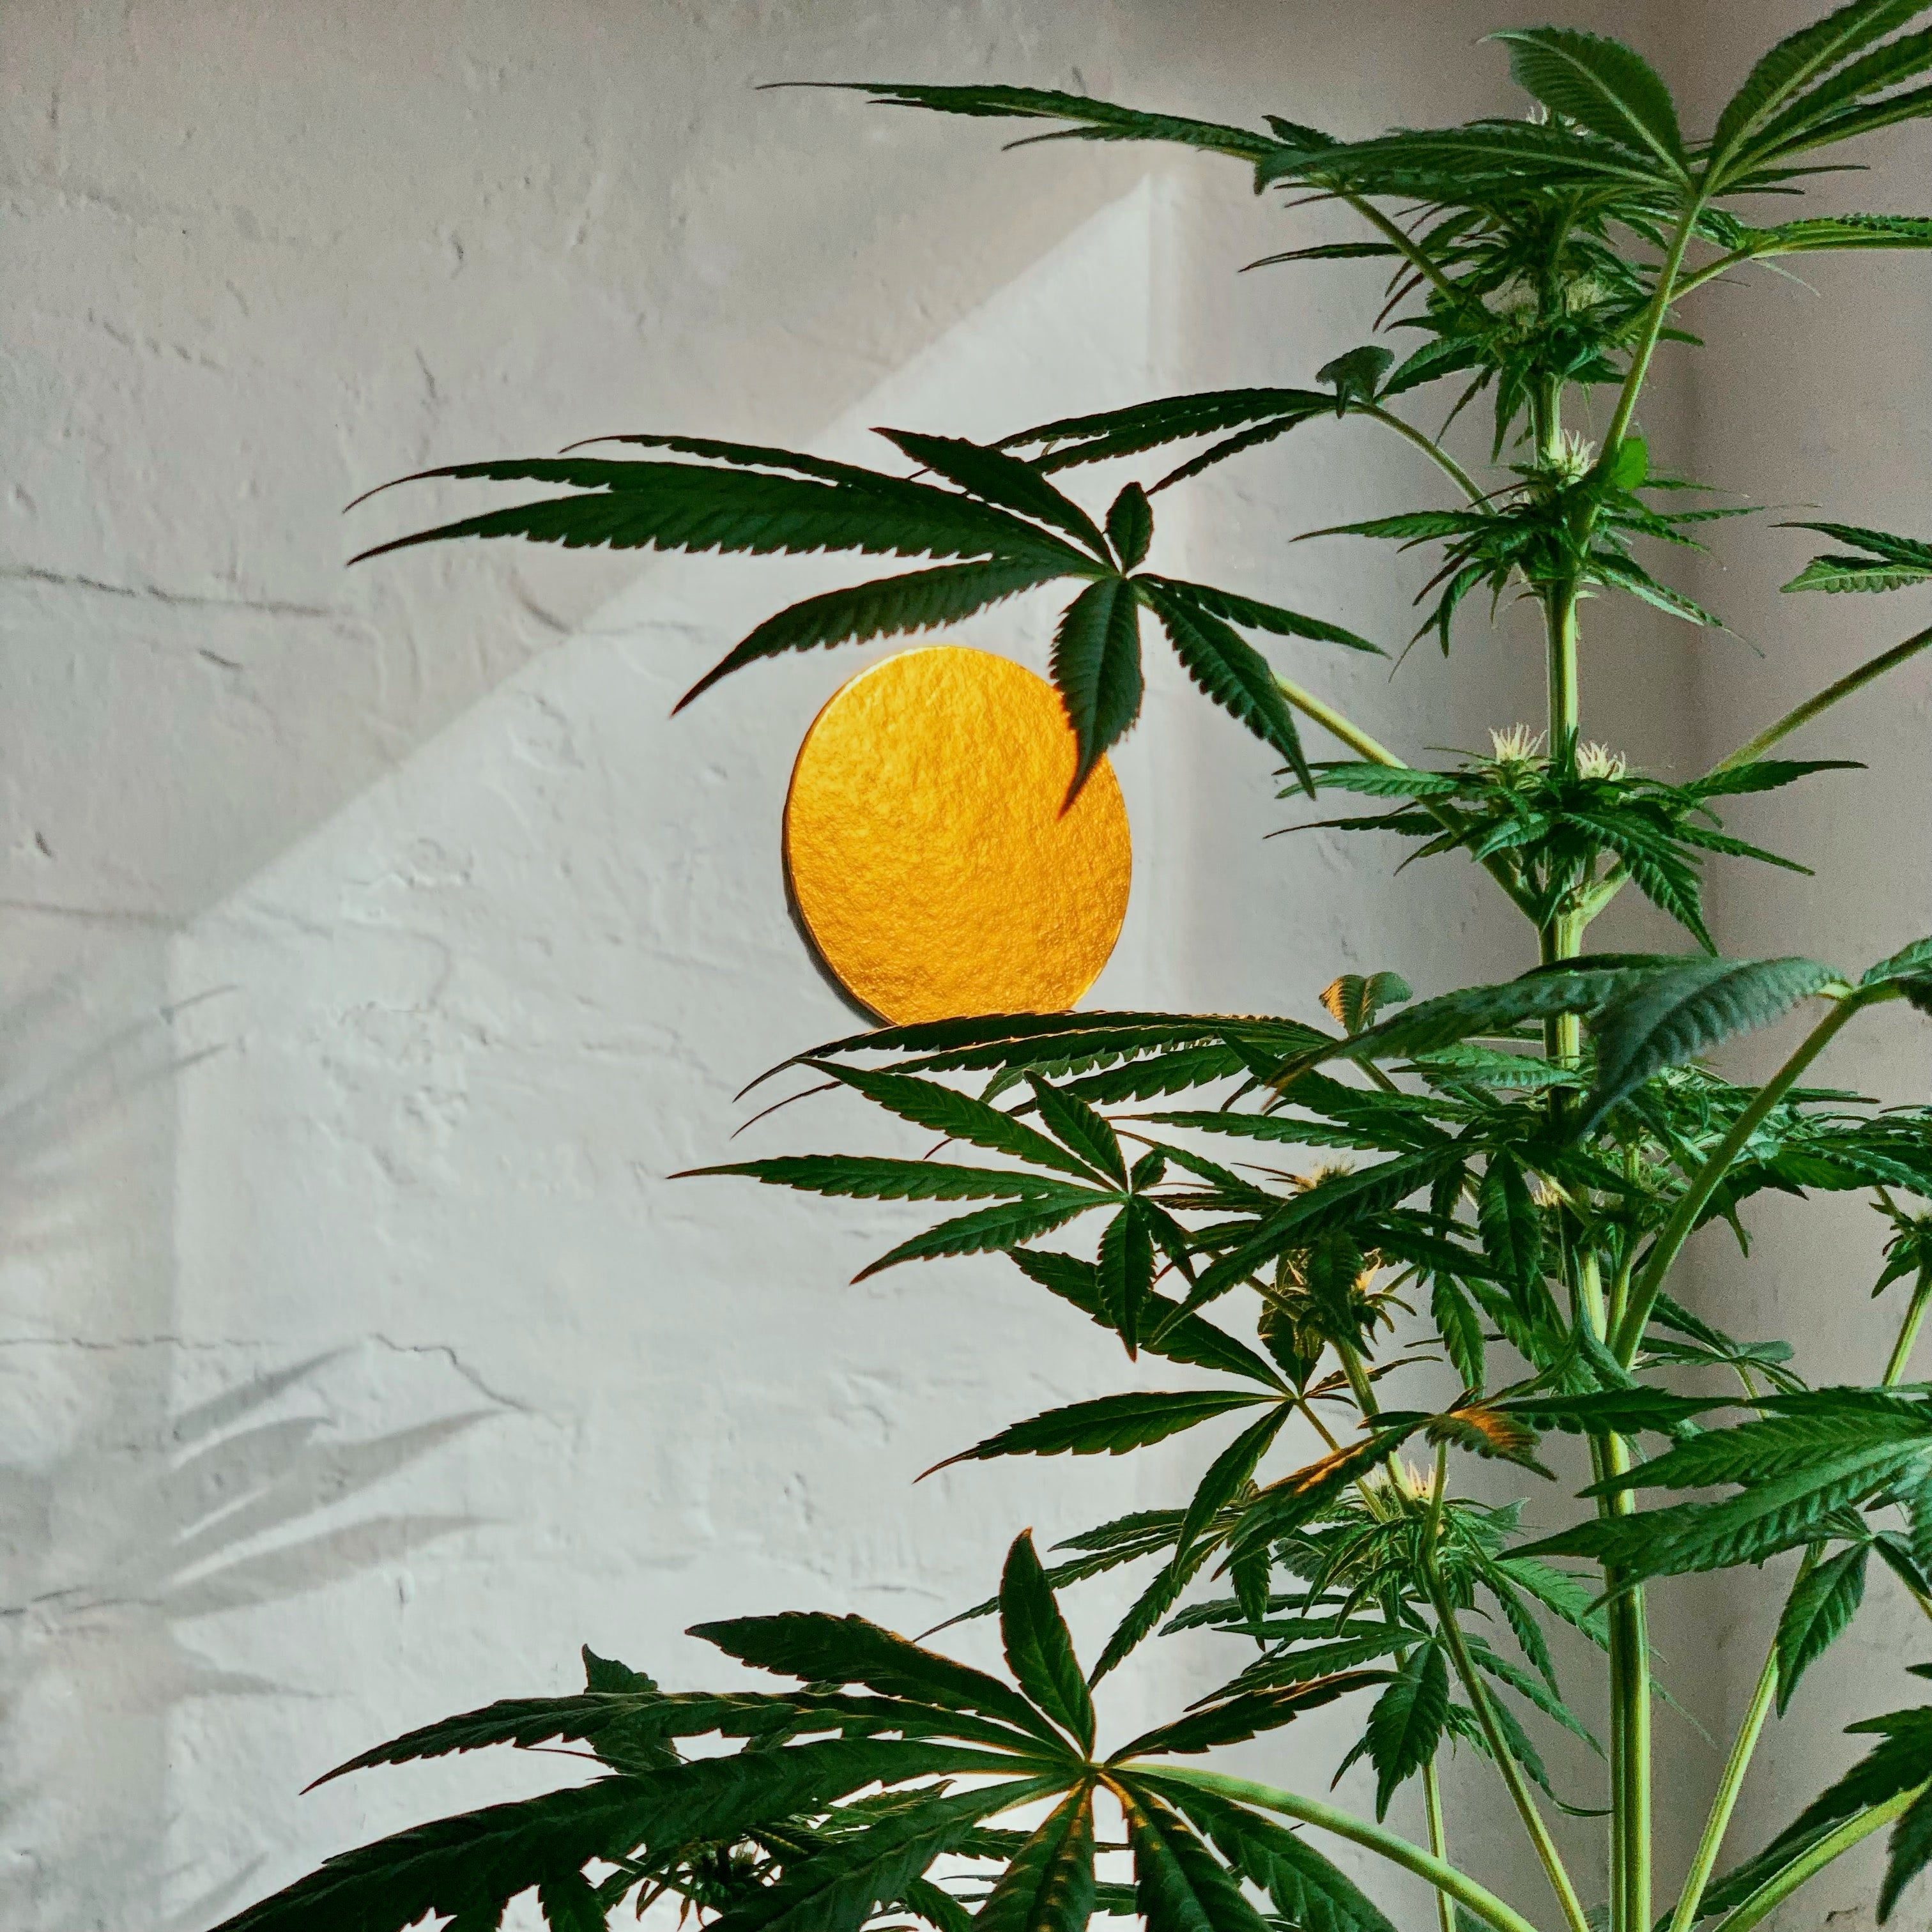 A tall hemp plant growing in front of a wall with a picture of a sun on it.